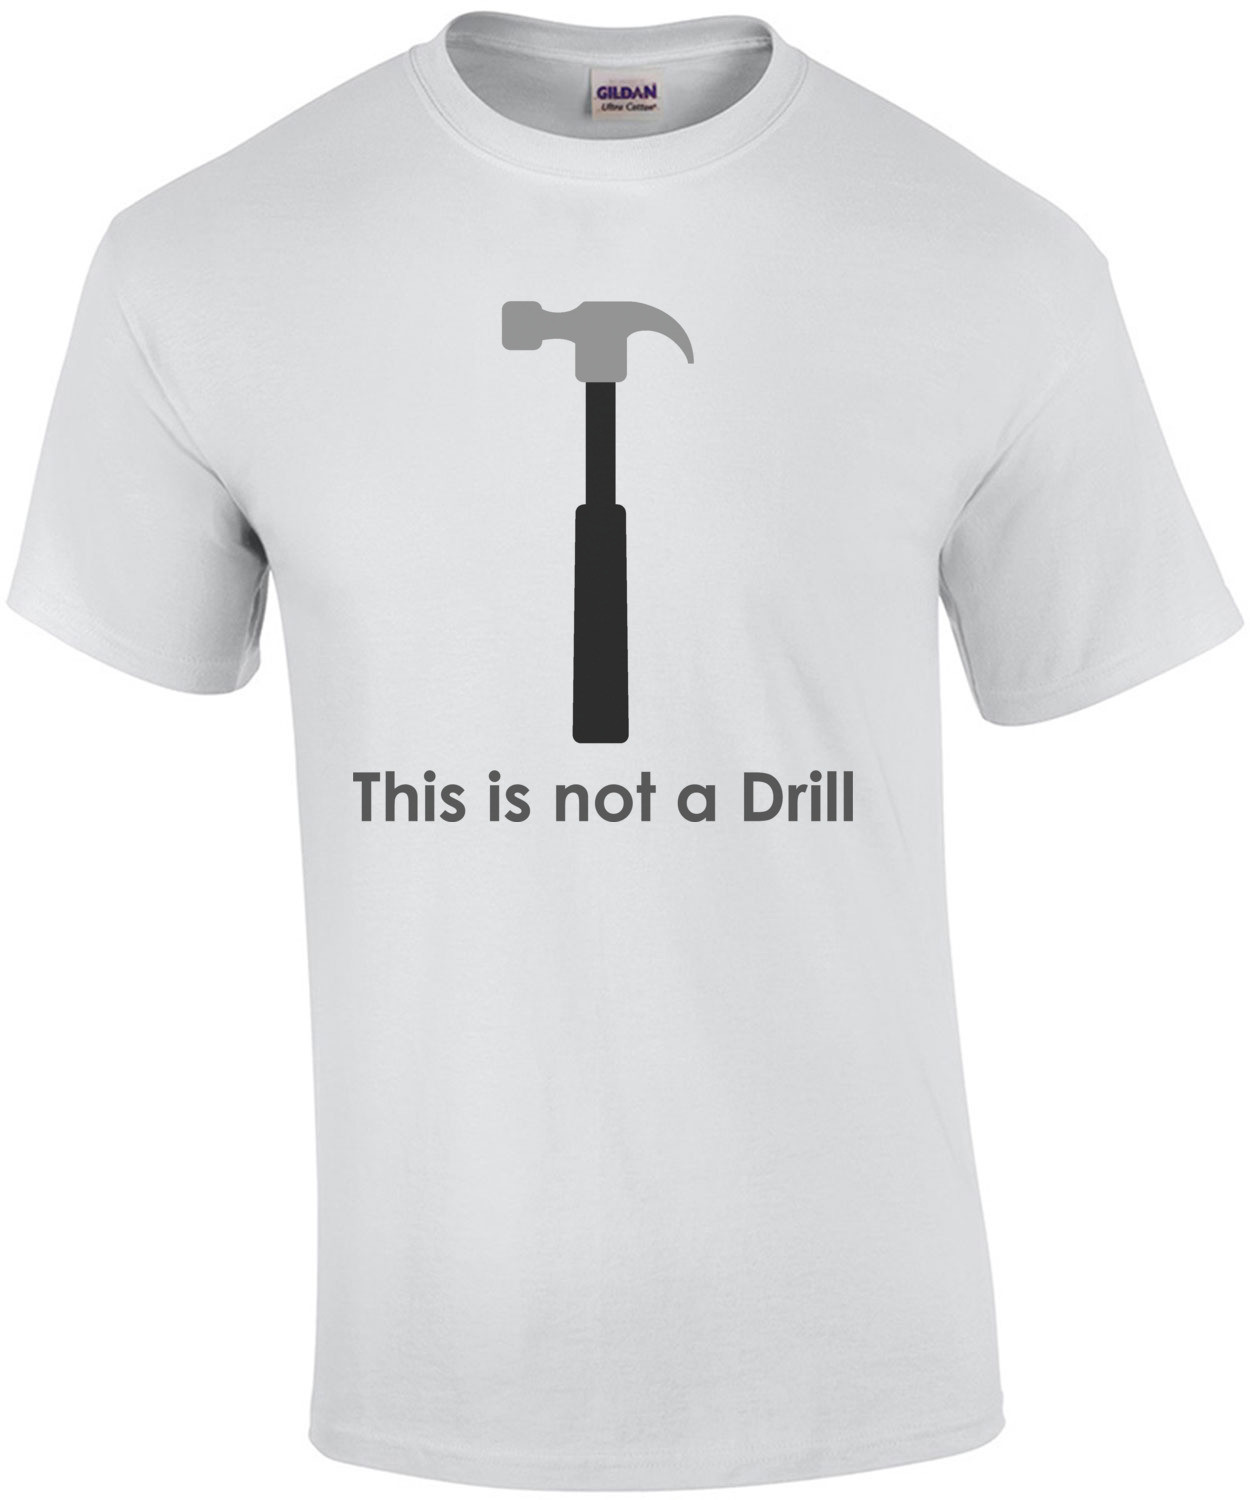 This is not a drill - Funny T-Shirt